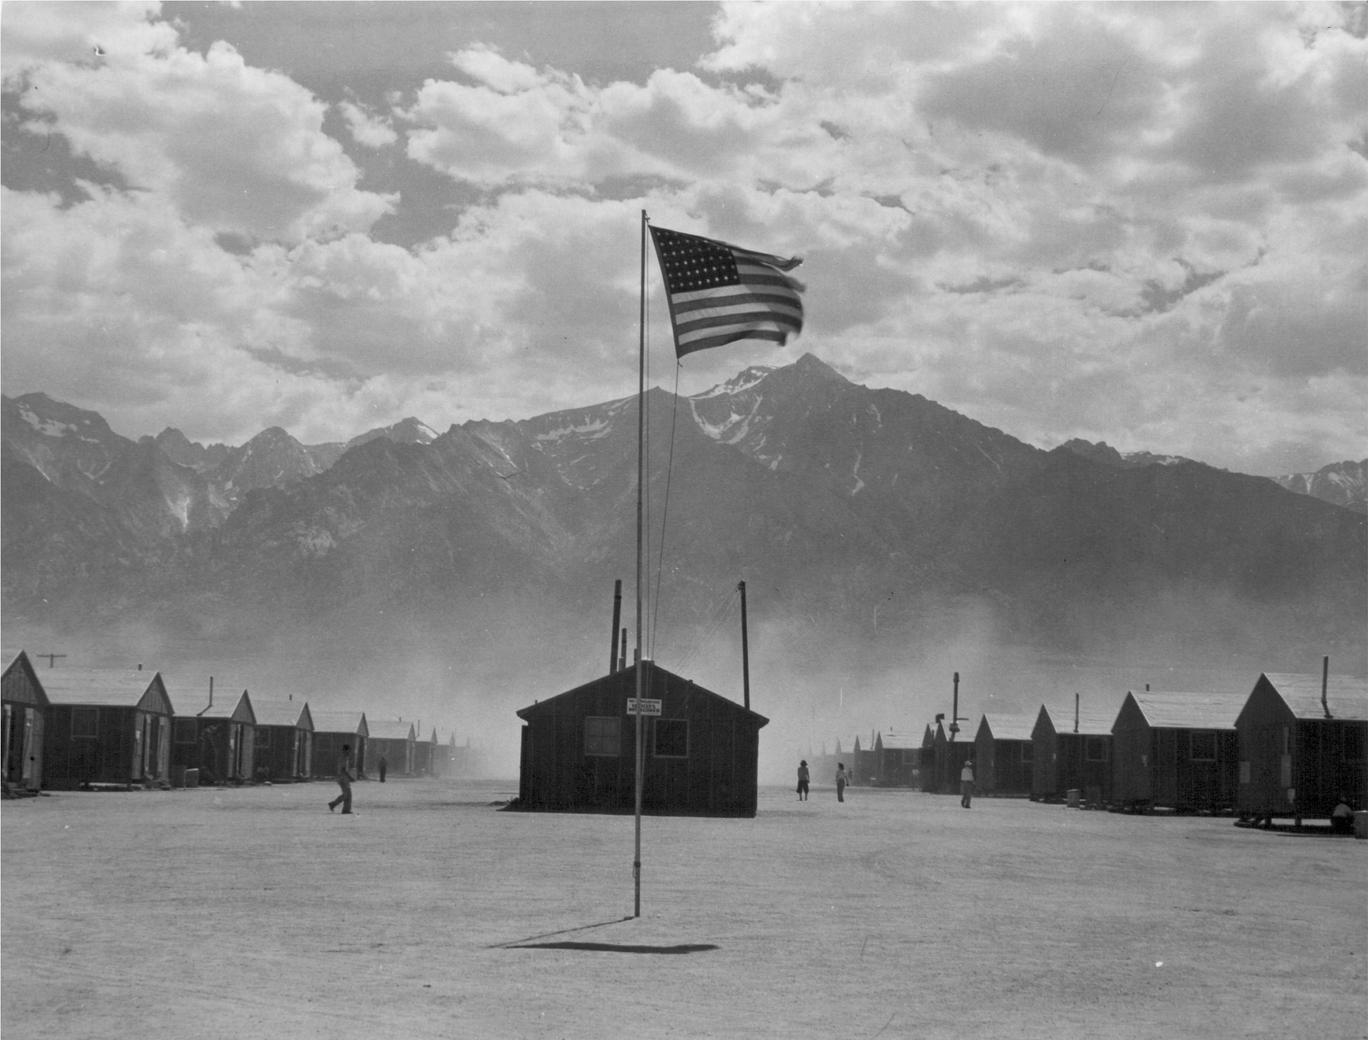 Wind storm and barrack homes at the internment camp in Manzanar, California, where Americans of Japanese ancestry were incarcerated during World War II.